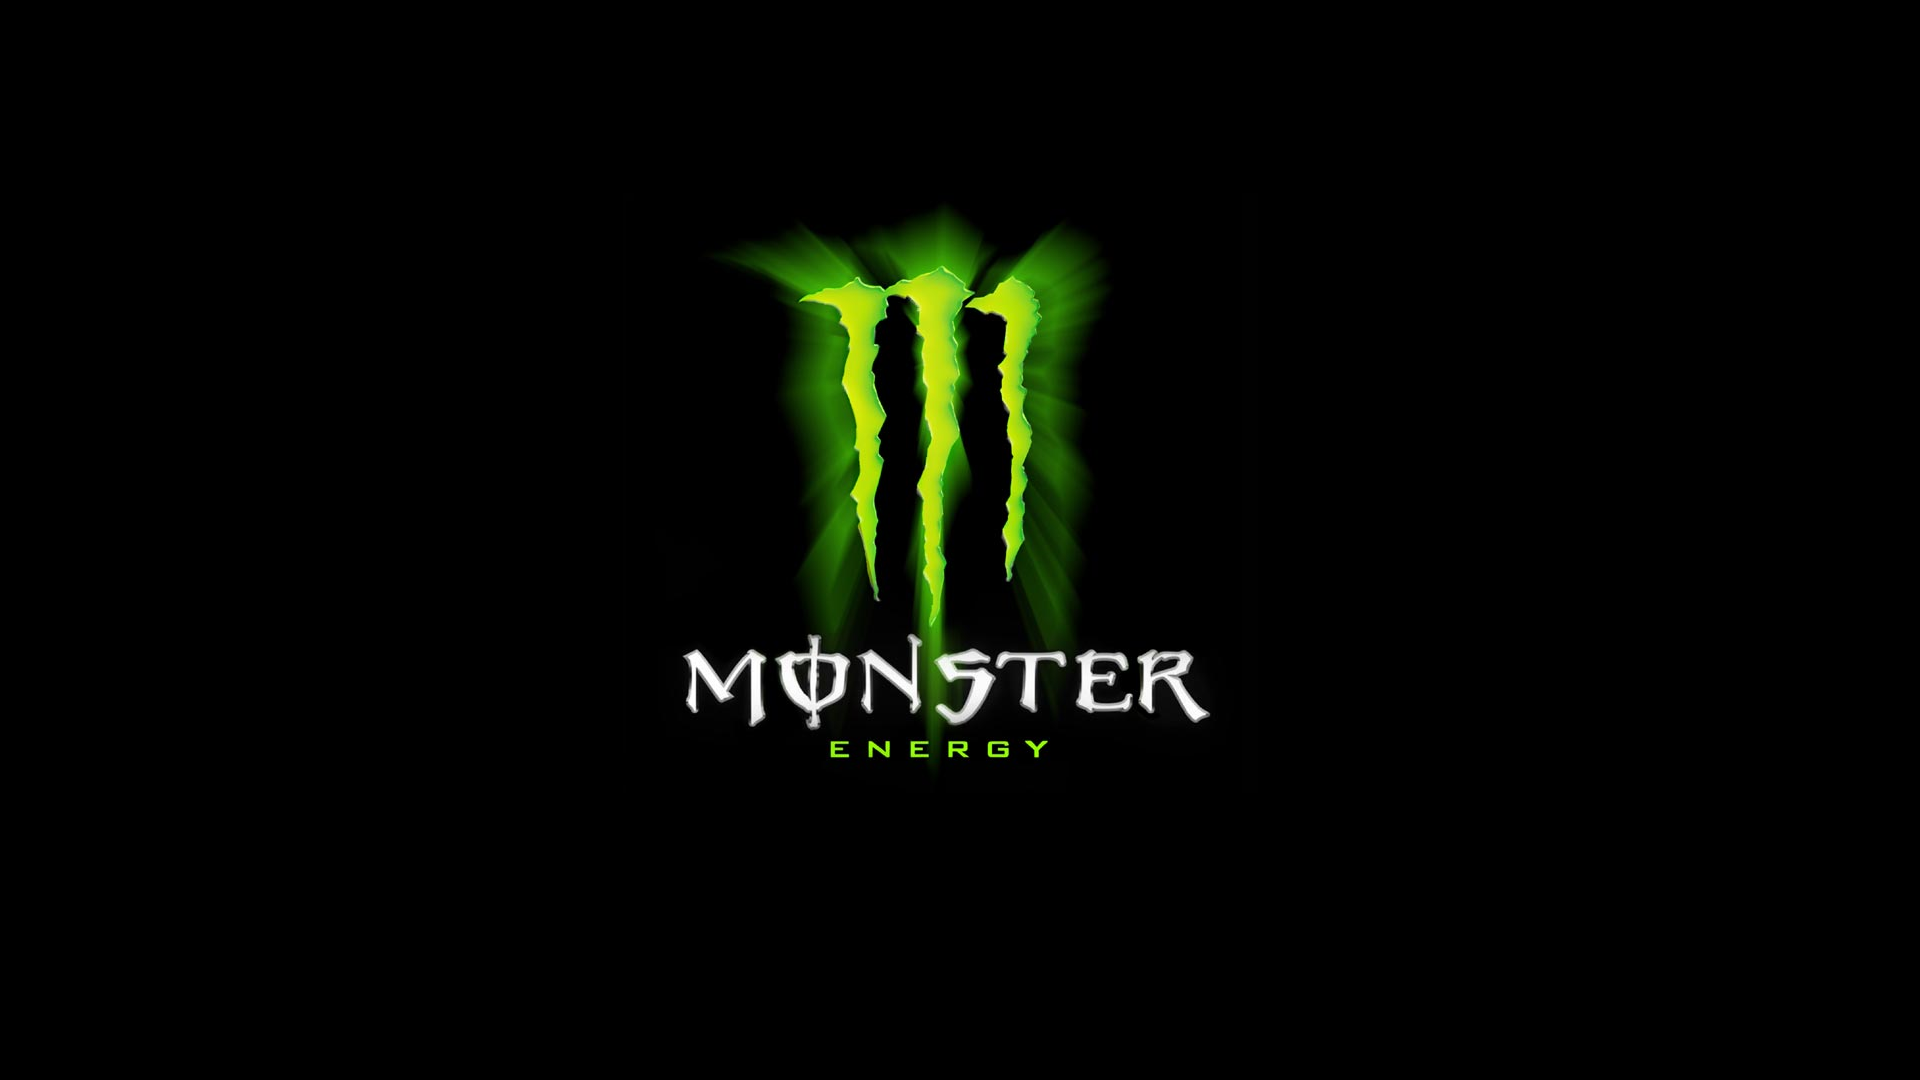 HD Monster Wallpapers and Photos, 1920x1080 | By Gregorio Mulholland